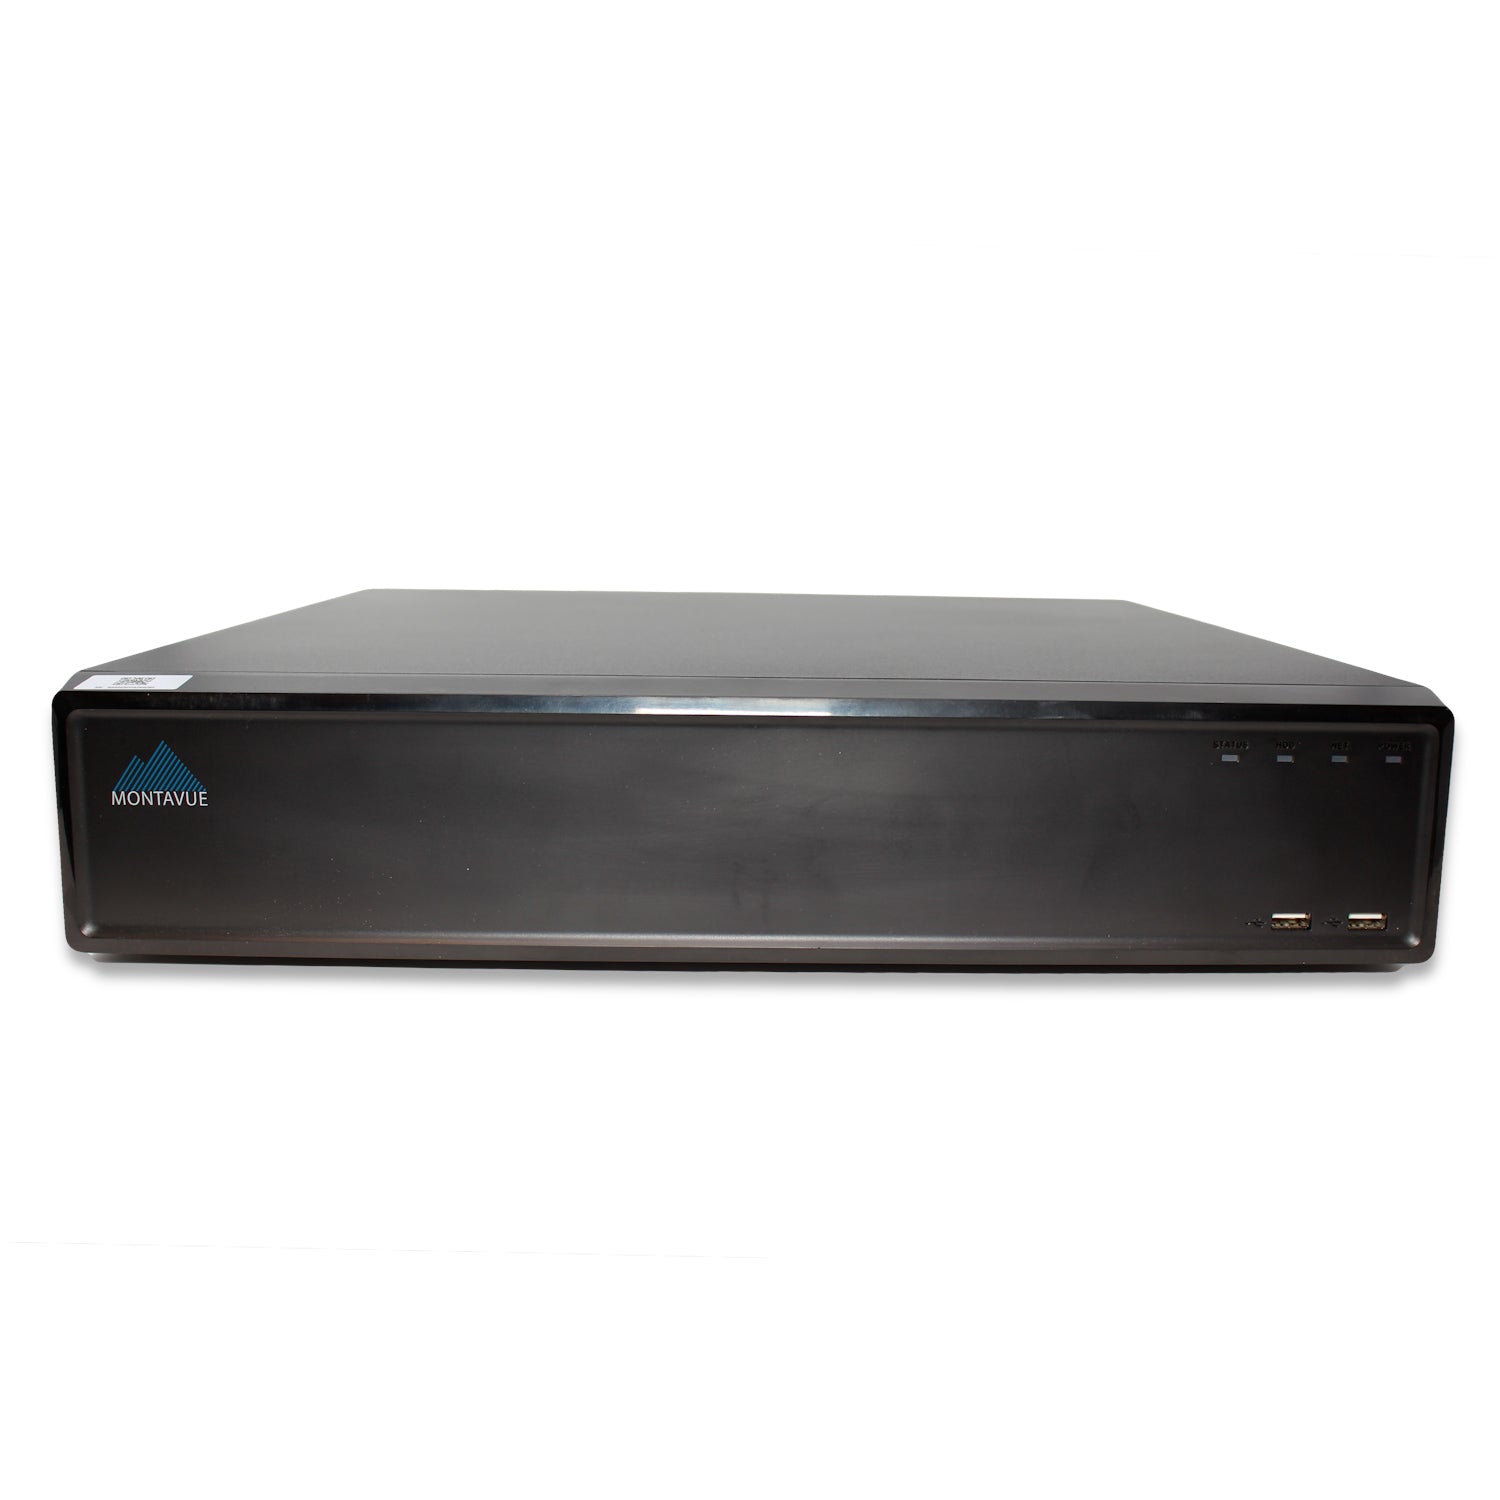 MNR5864-AI | 64 Channel 4K H.265+ Pro-AI NVR with 160TB (8x20TB) HDD Max Internal Capacity, eSATA Expandable - HDDs Not Included - Montavue